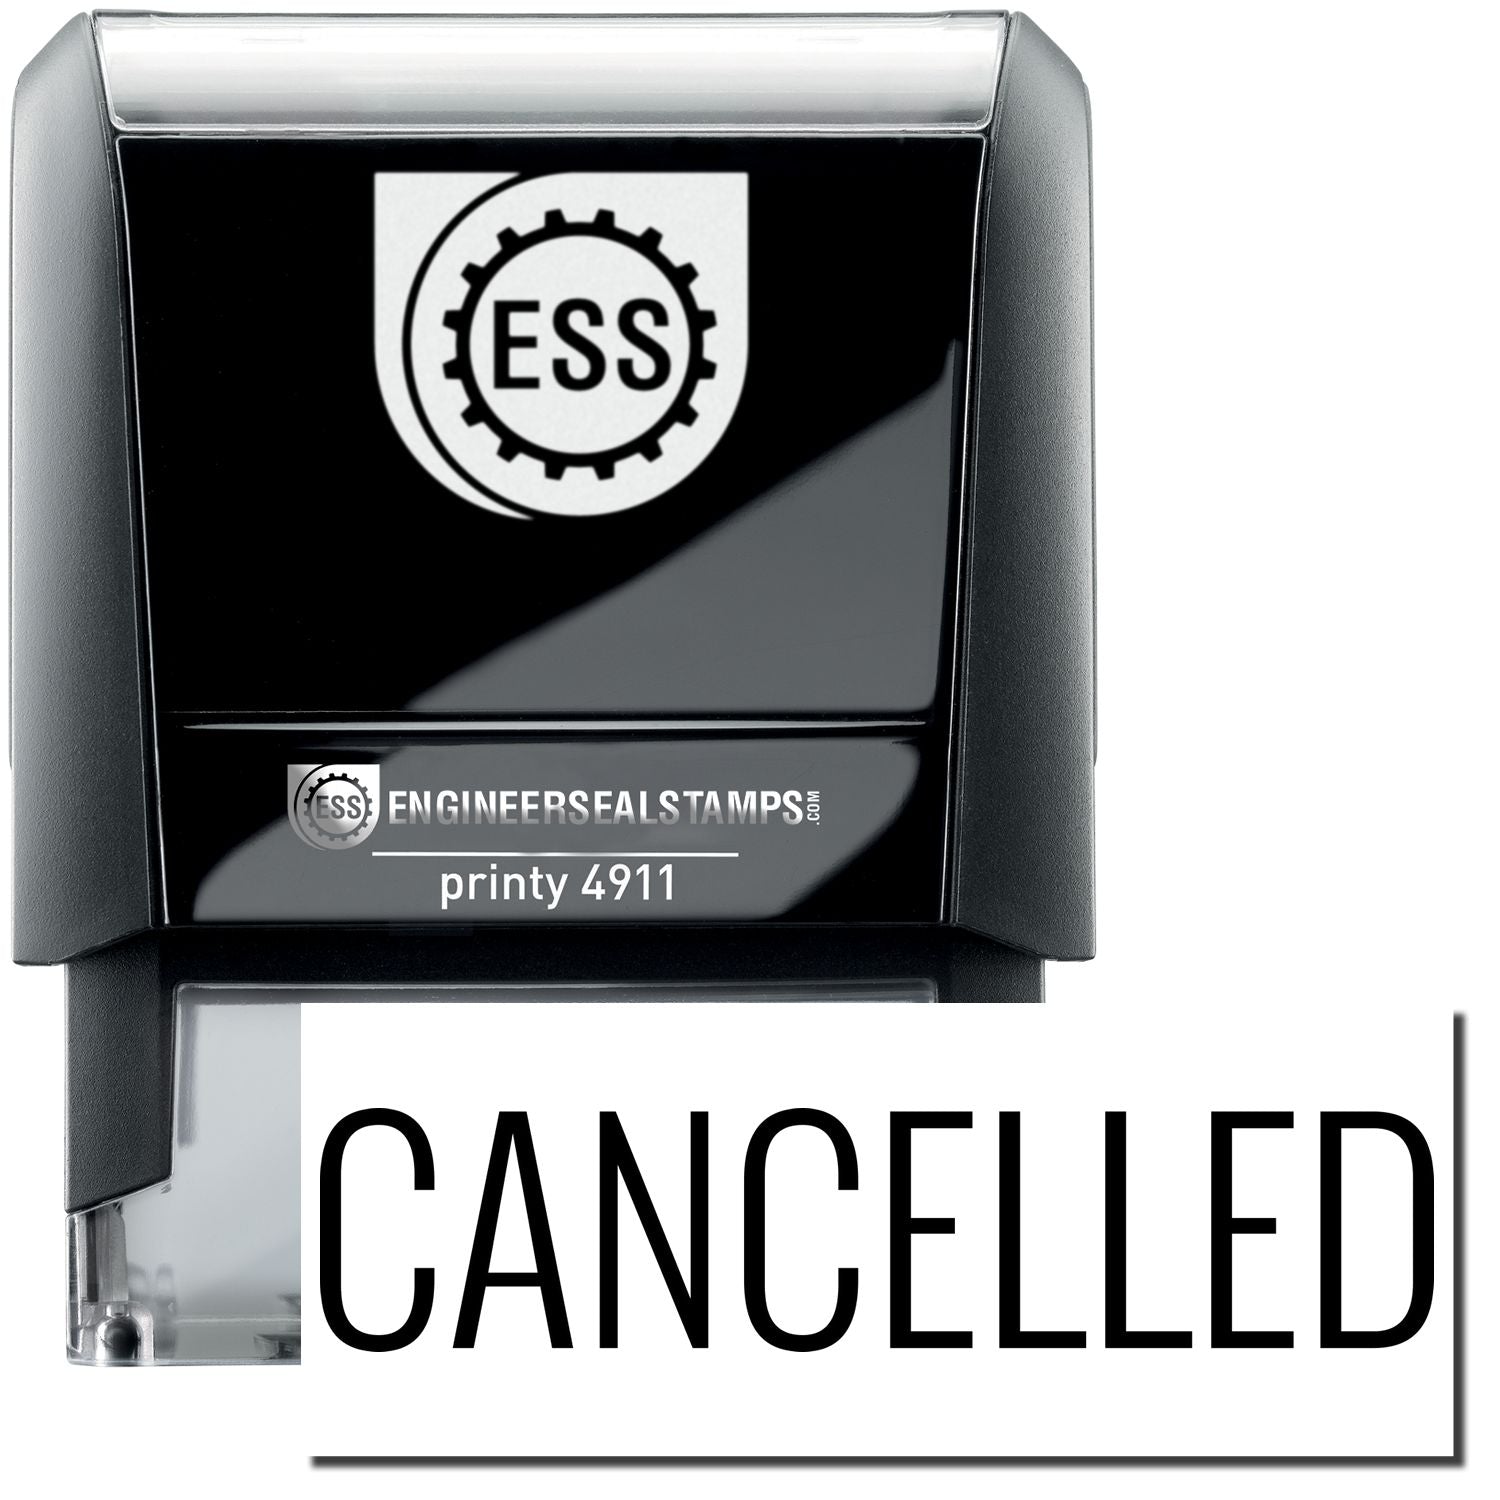 A self-inking stamp with a stamped image showing how the text "CLASSIFIED" in a narrow font is displayed after stamping.